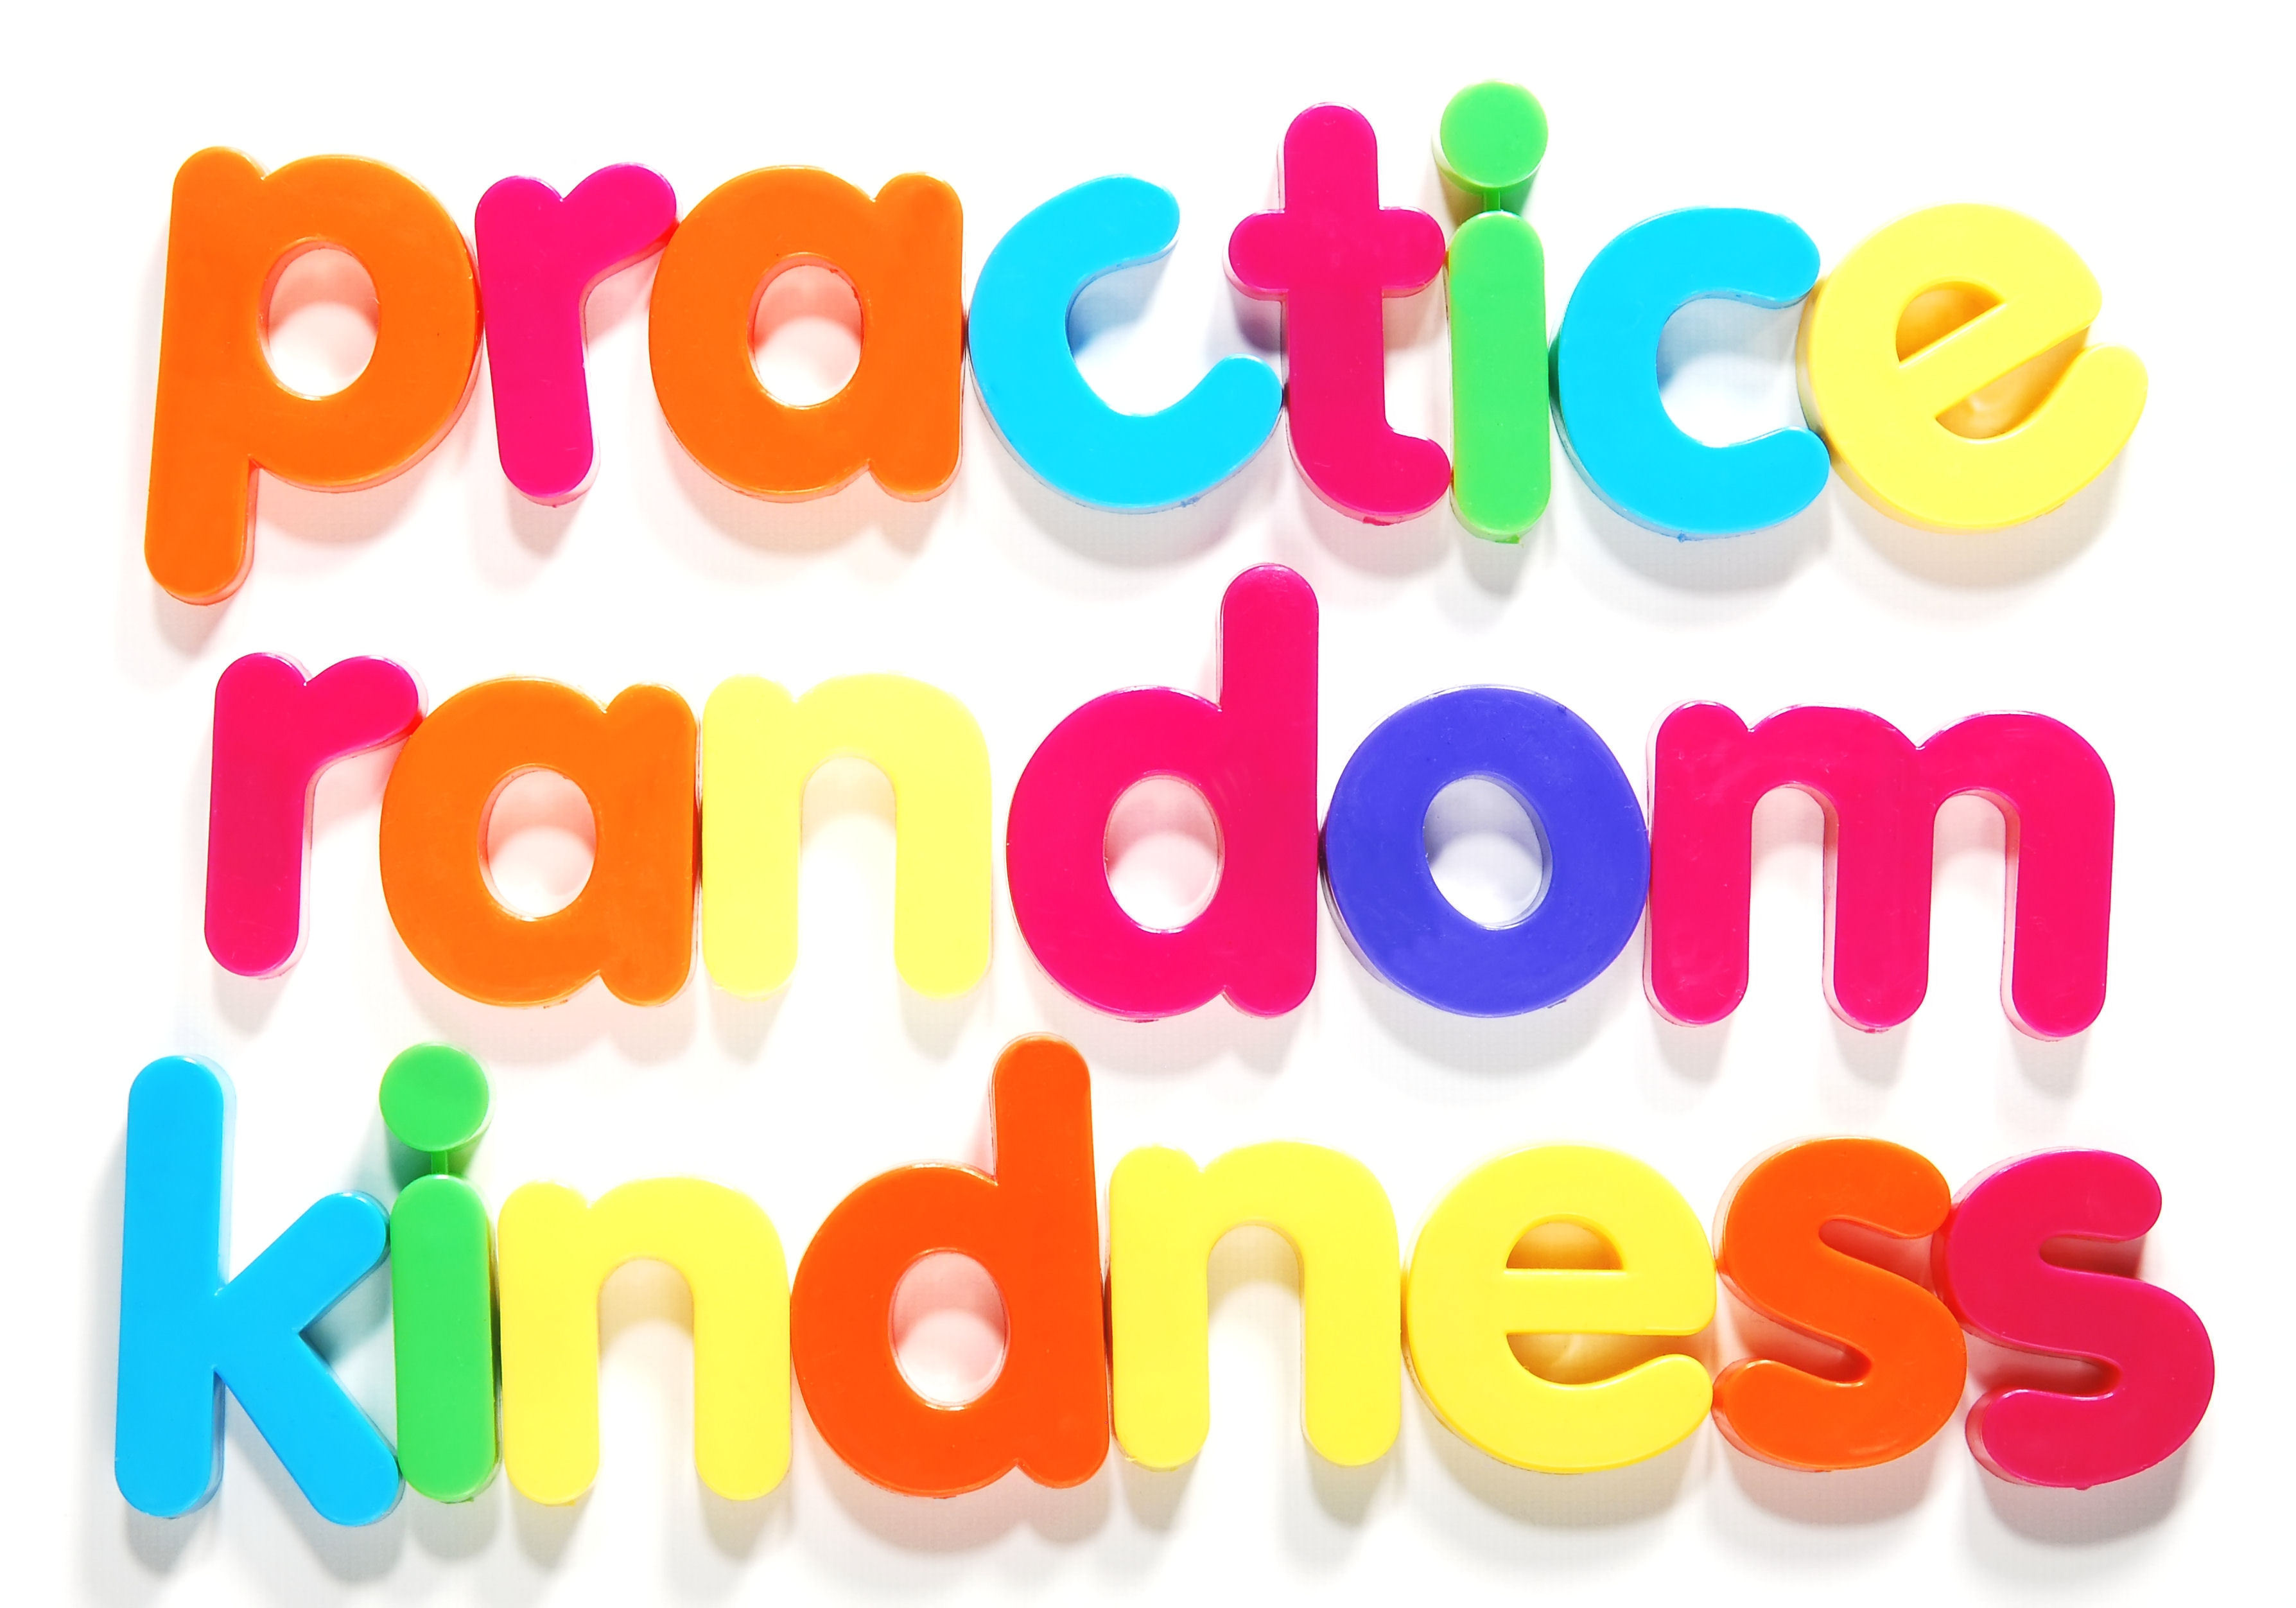 random-acts-of-kindness-week